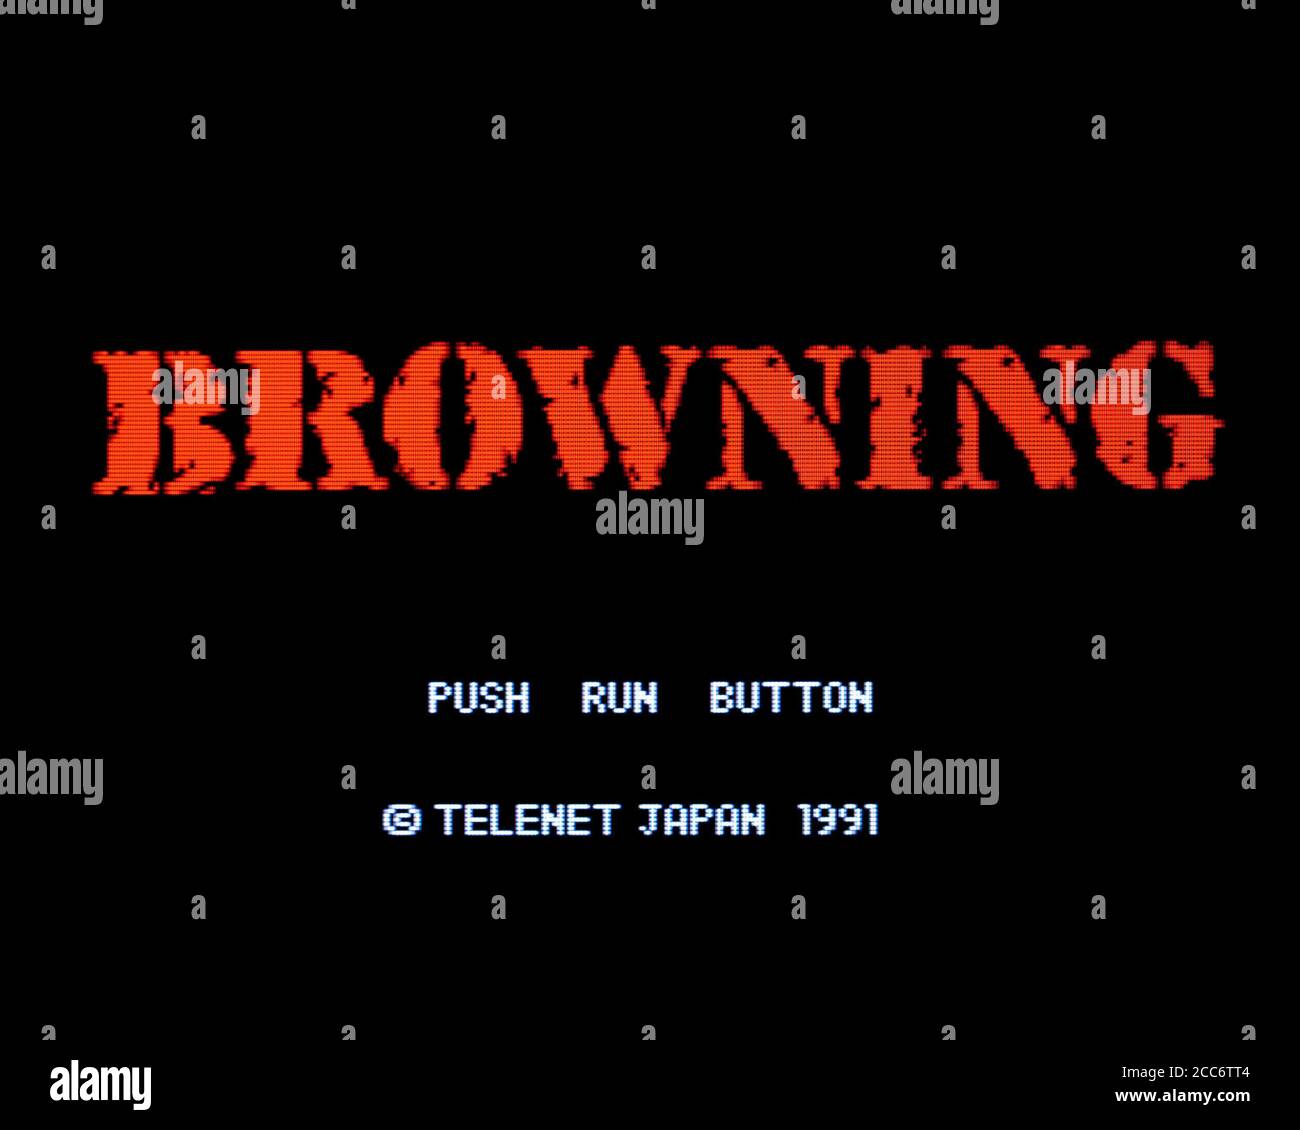 Browning - PC Engine CD Videogame - Editorial use only Stock Photo